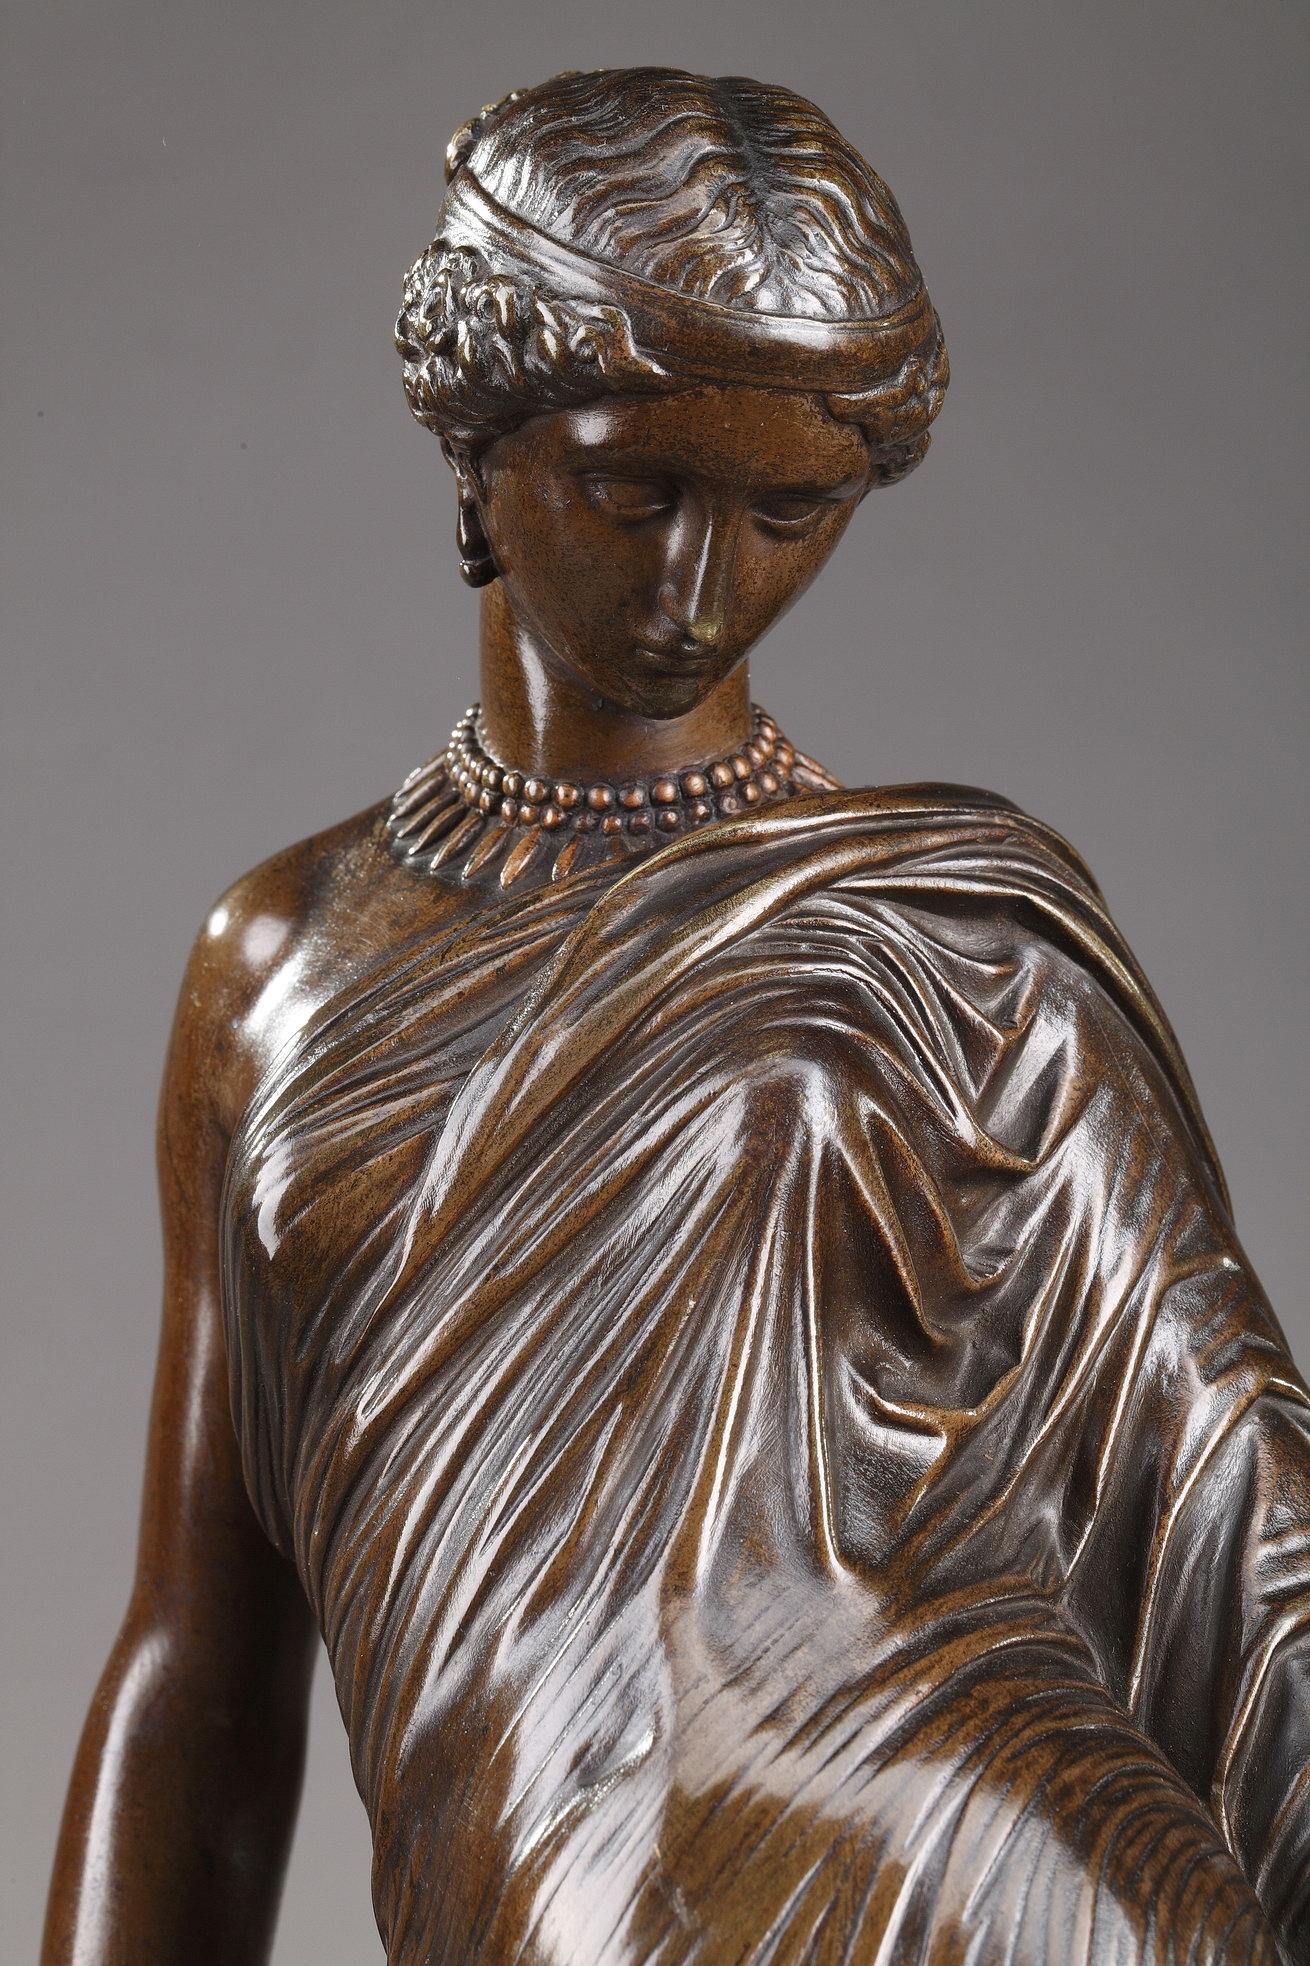 Bronze sculpture with brown patina featuring Sappho after Jean-Jacques, dit James Pradier (1790-1852). The poet wears a beautiful antique tunic and jewels. Sappho is known for her lyric poetry, written to be sung while accompagnied by a lyre, that